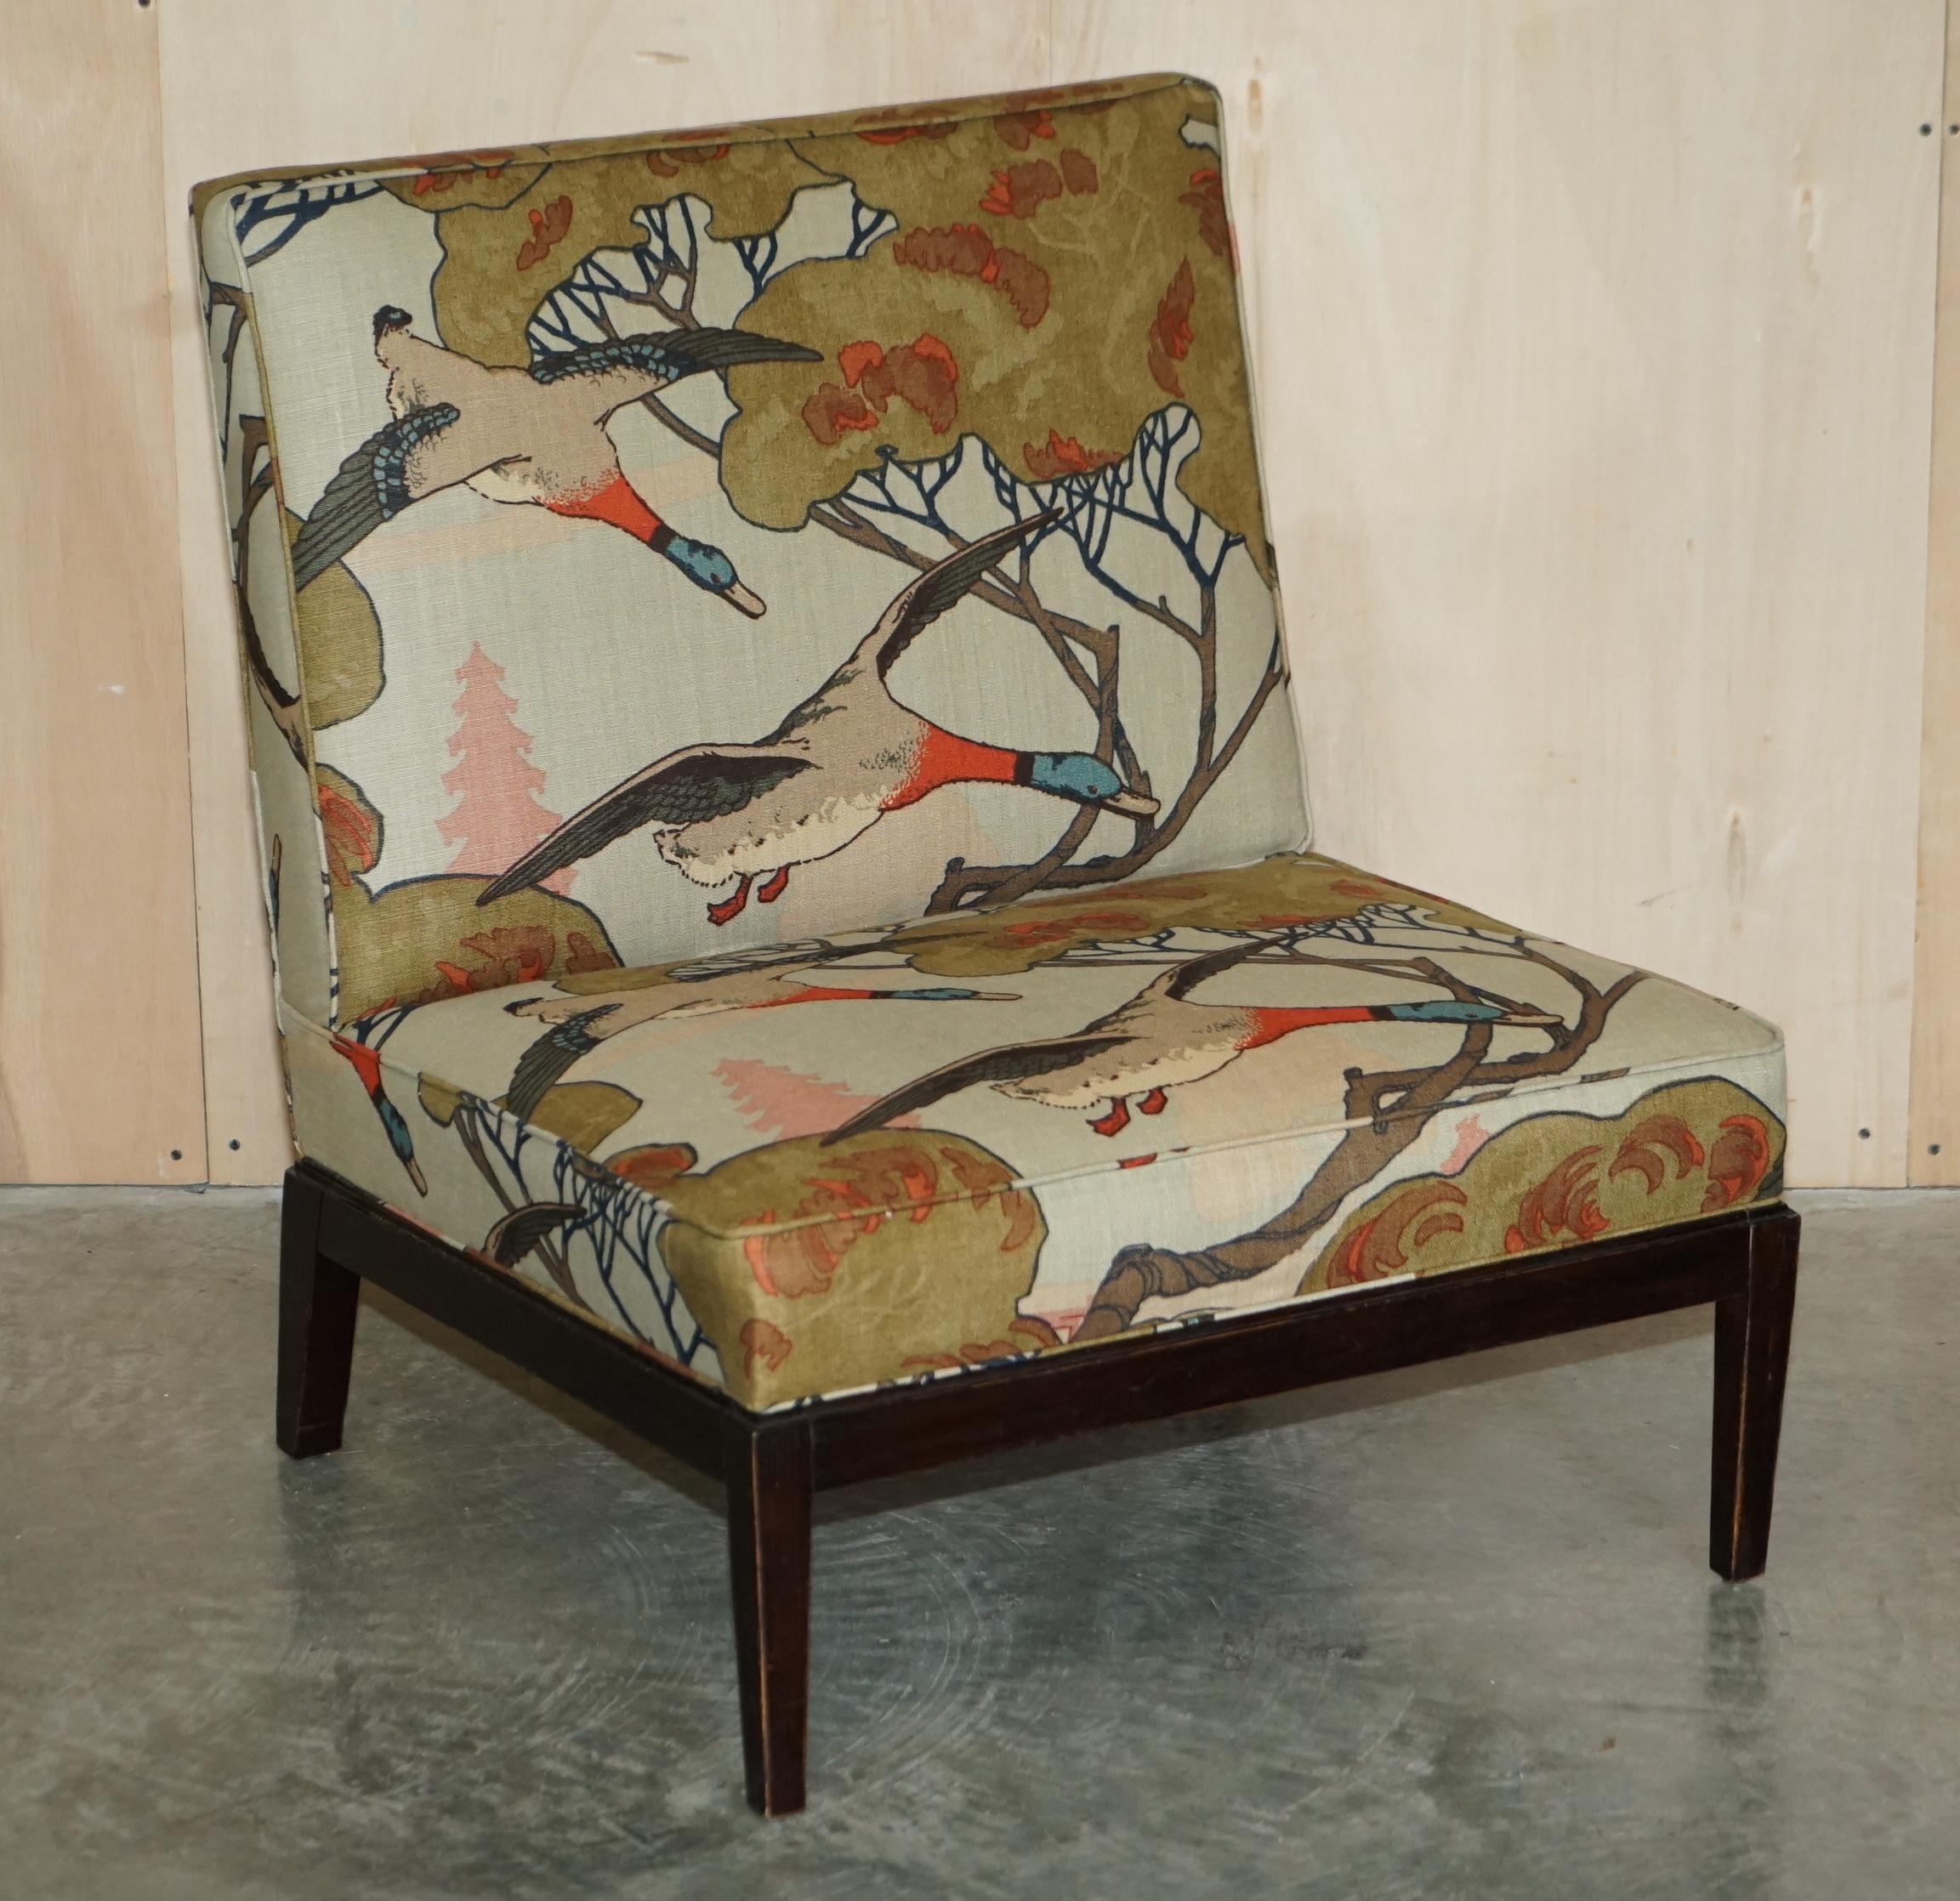 We are delighted to offer for sale this pair of fully refurbished, George Smith Norris armchairs upholstered in Mulberry Flying Ducks linen which are part of a suite

I have five of these armchairs for sale and one three seat sofa, the armchairs are